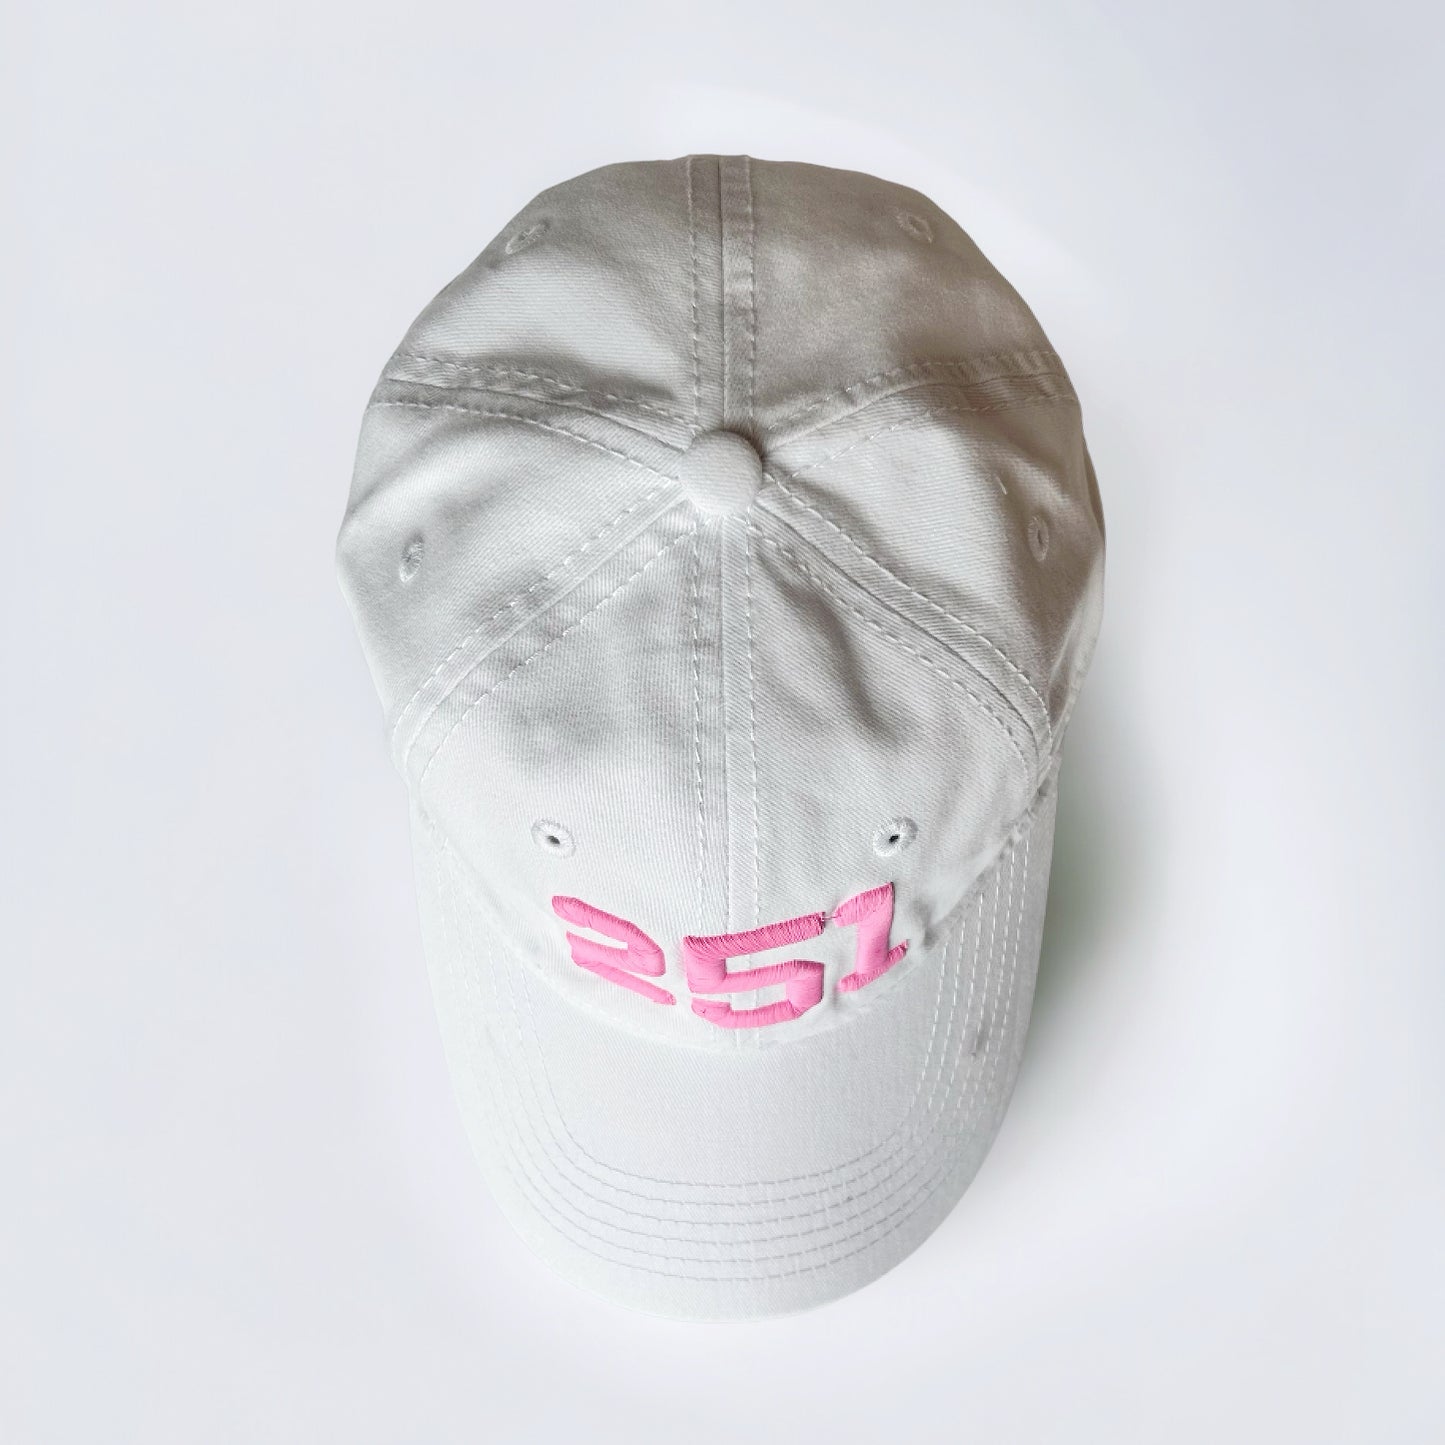 White with Pink 251 Ball Cap Hat